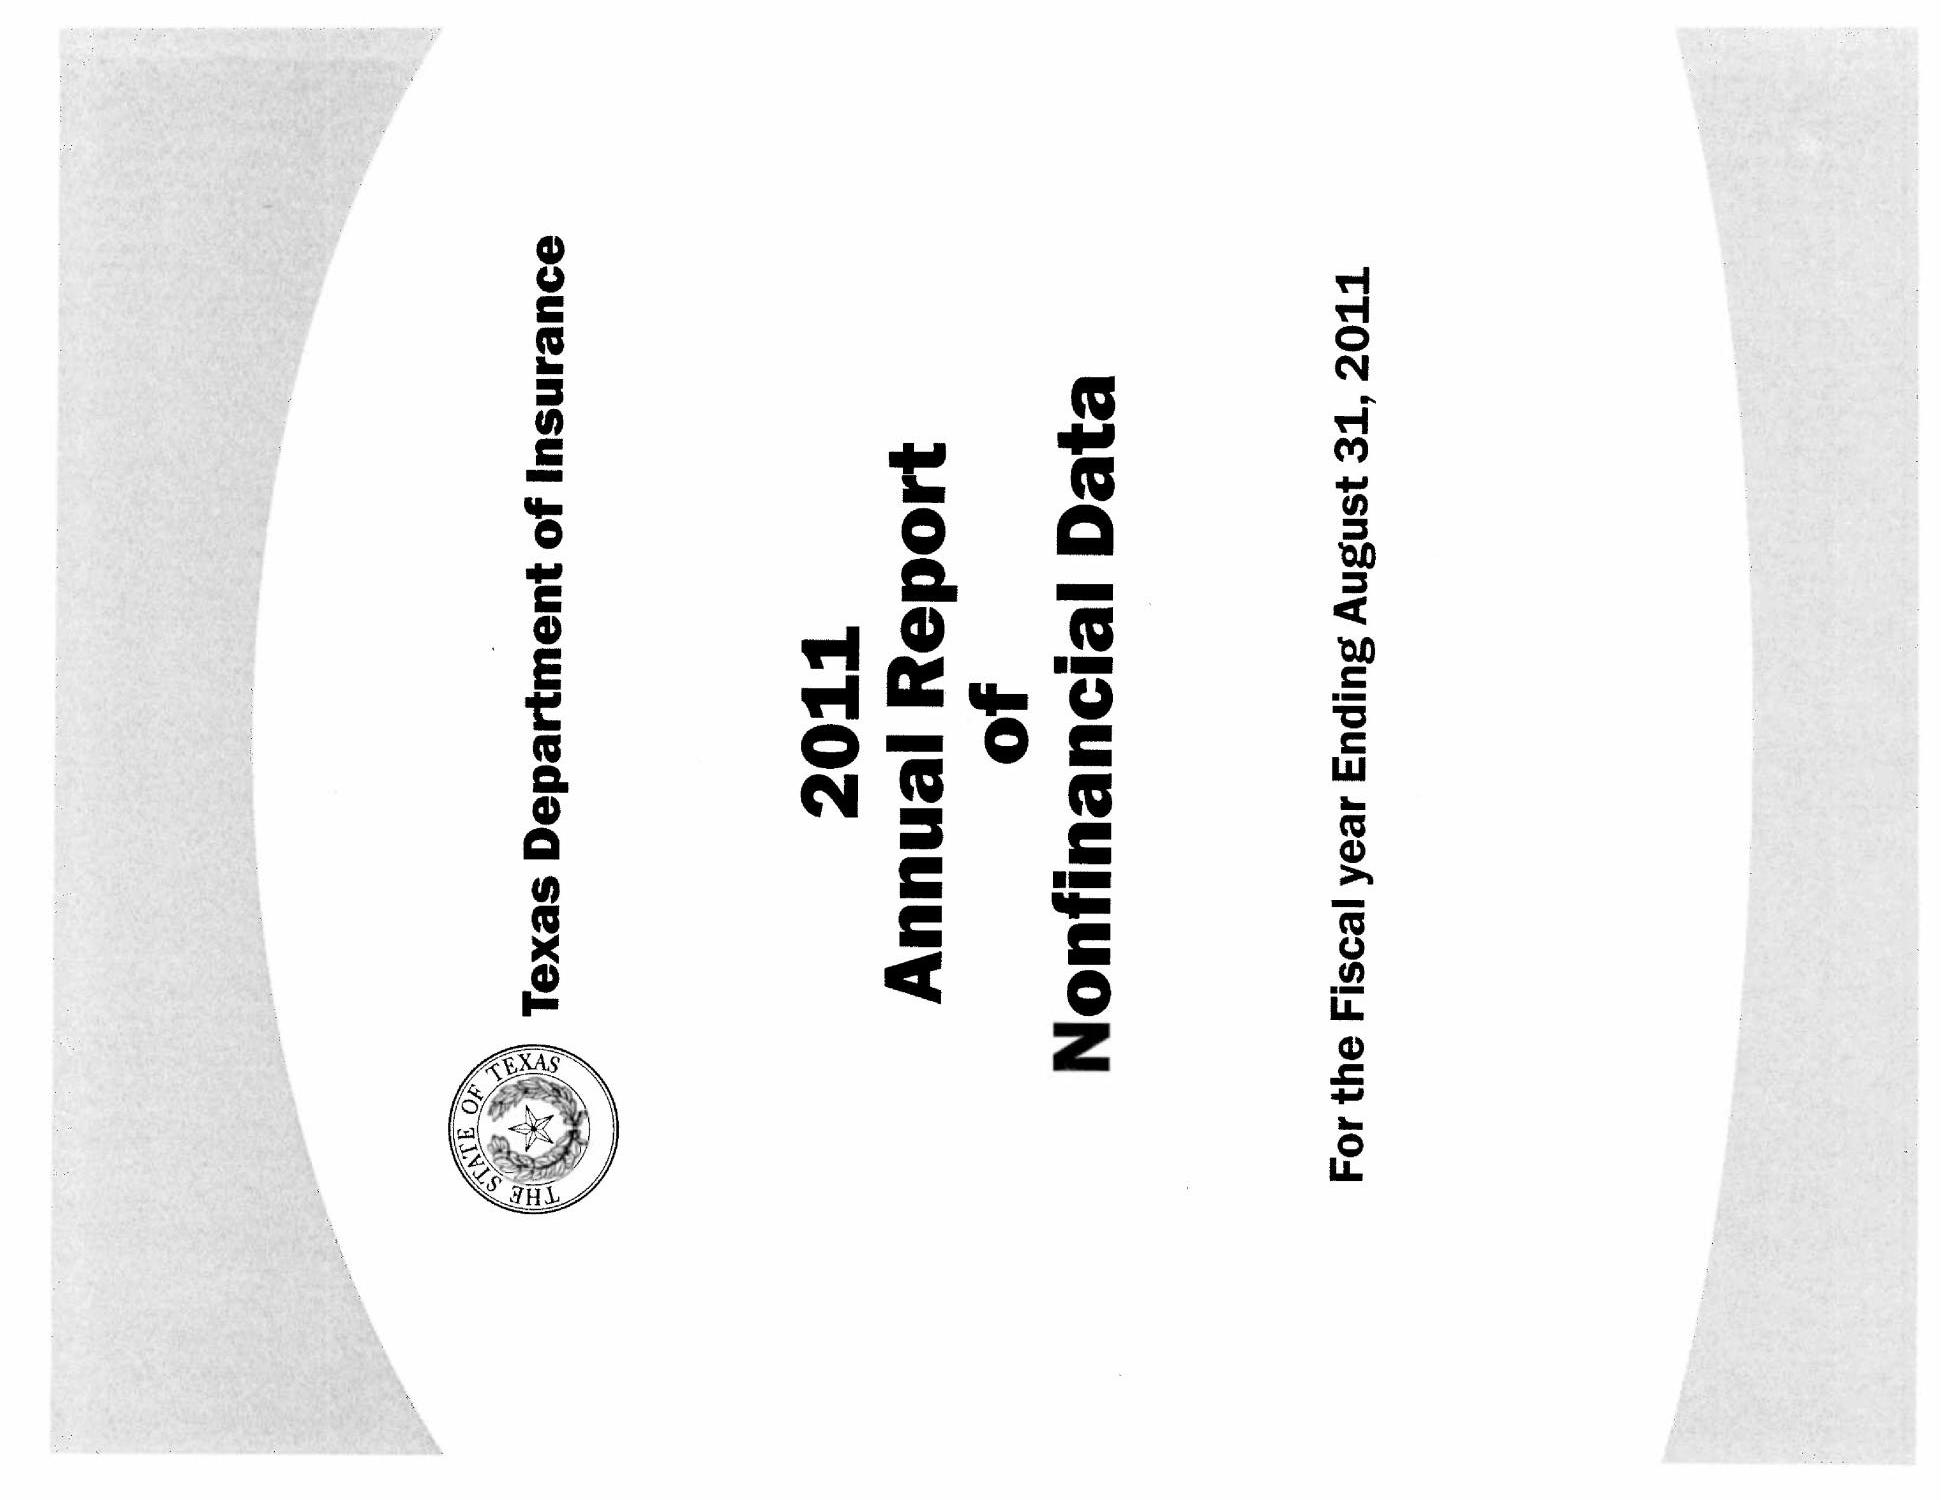 Texas Department of Insurance Annual Report of Nonfinancial Data: 2011
                                                
                                                    Front Cover
                                                